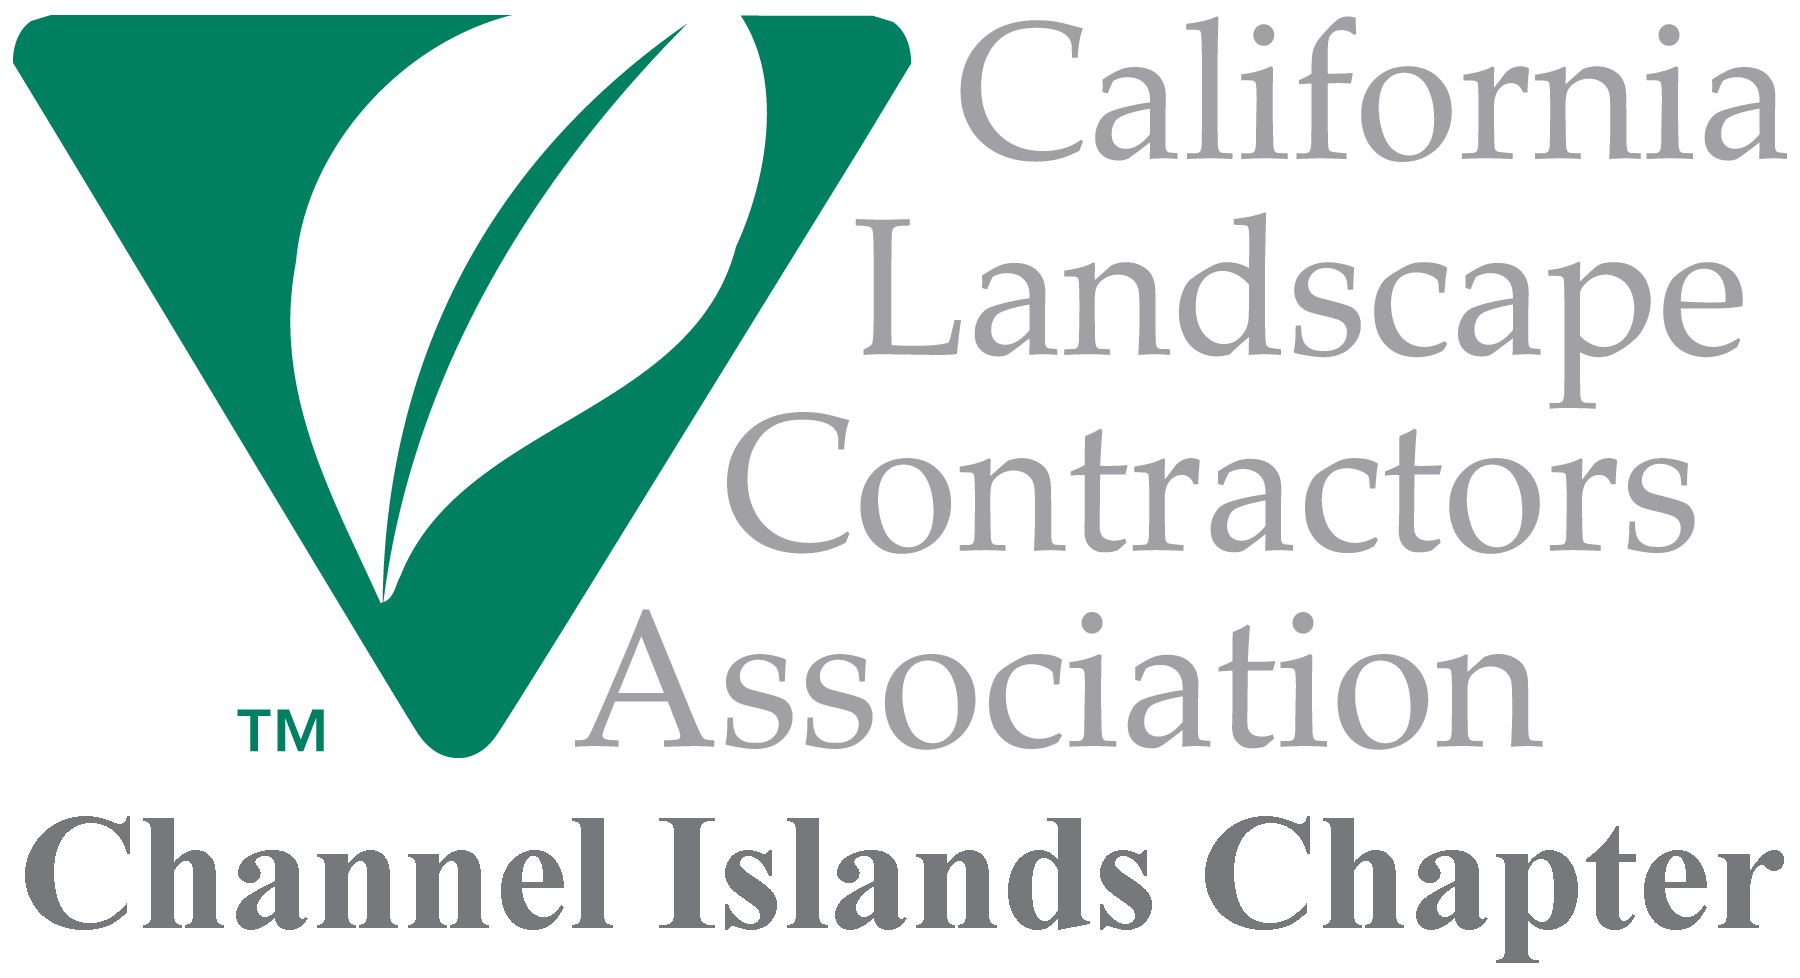 CLCA Channel Islands Chapter